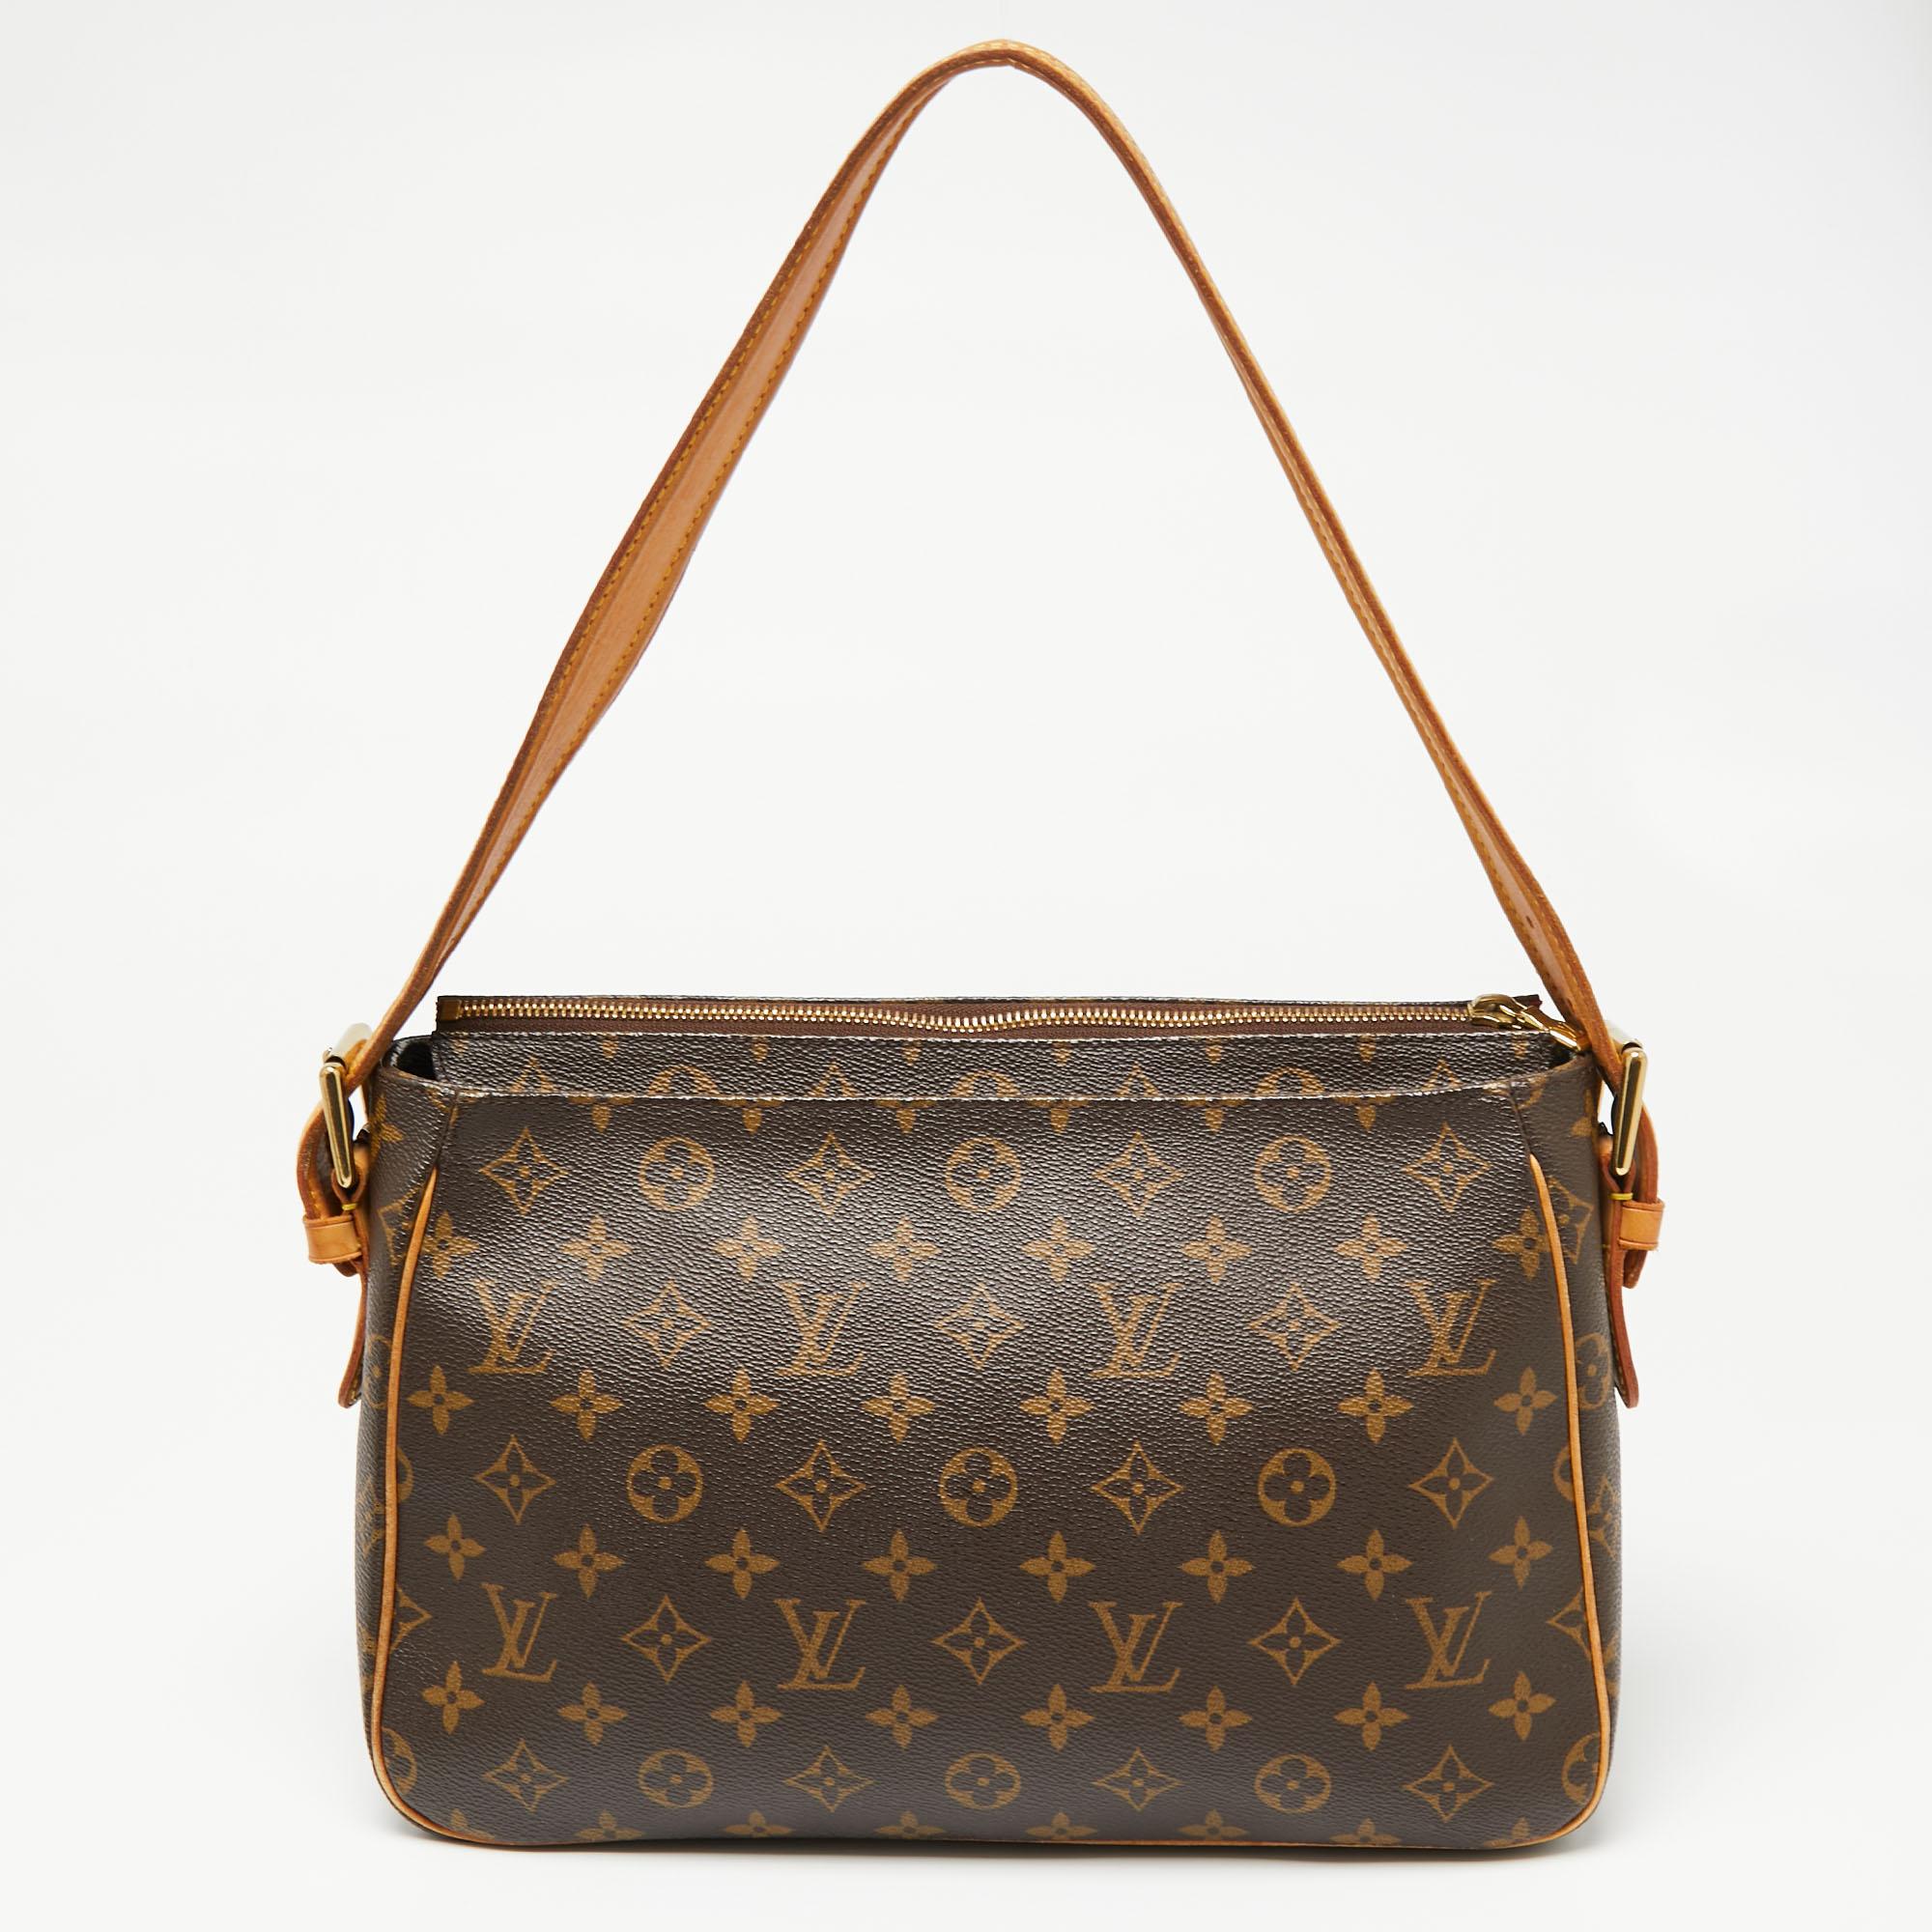 This Louis Vuitton Viva Cite GM bag has the perfect fusion of fashion and practicality. Constructed from the signature monogram canvas with a contrast pipeline, it embodies a minimalistic design with an elegant touch. It is defined by a short